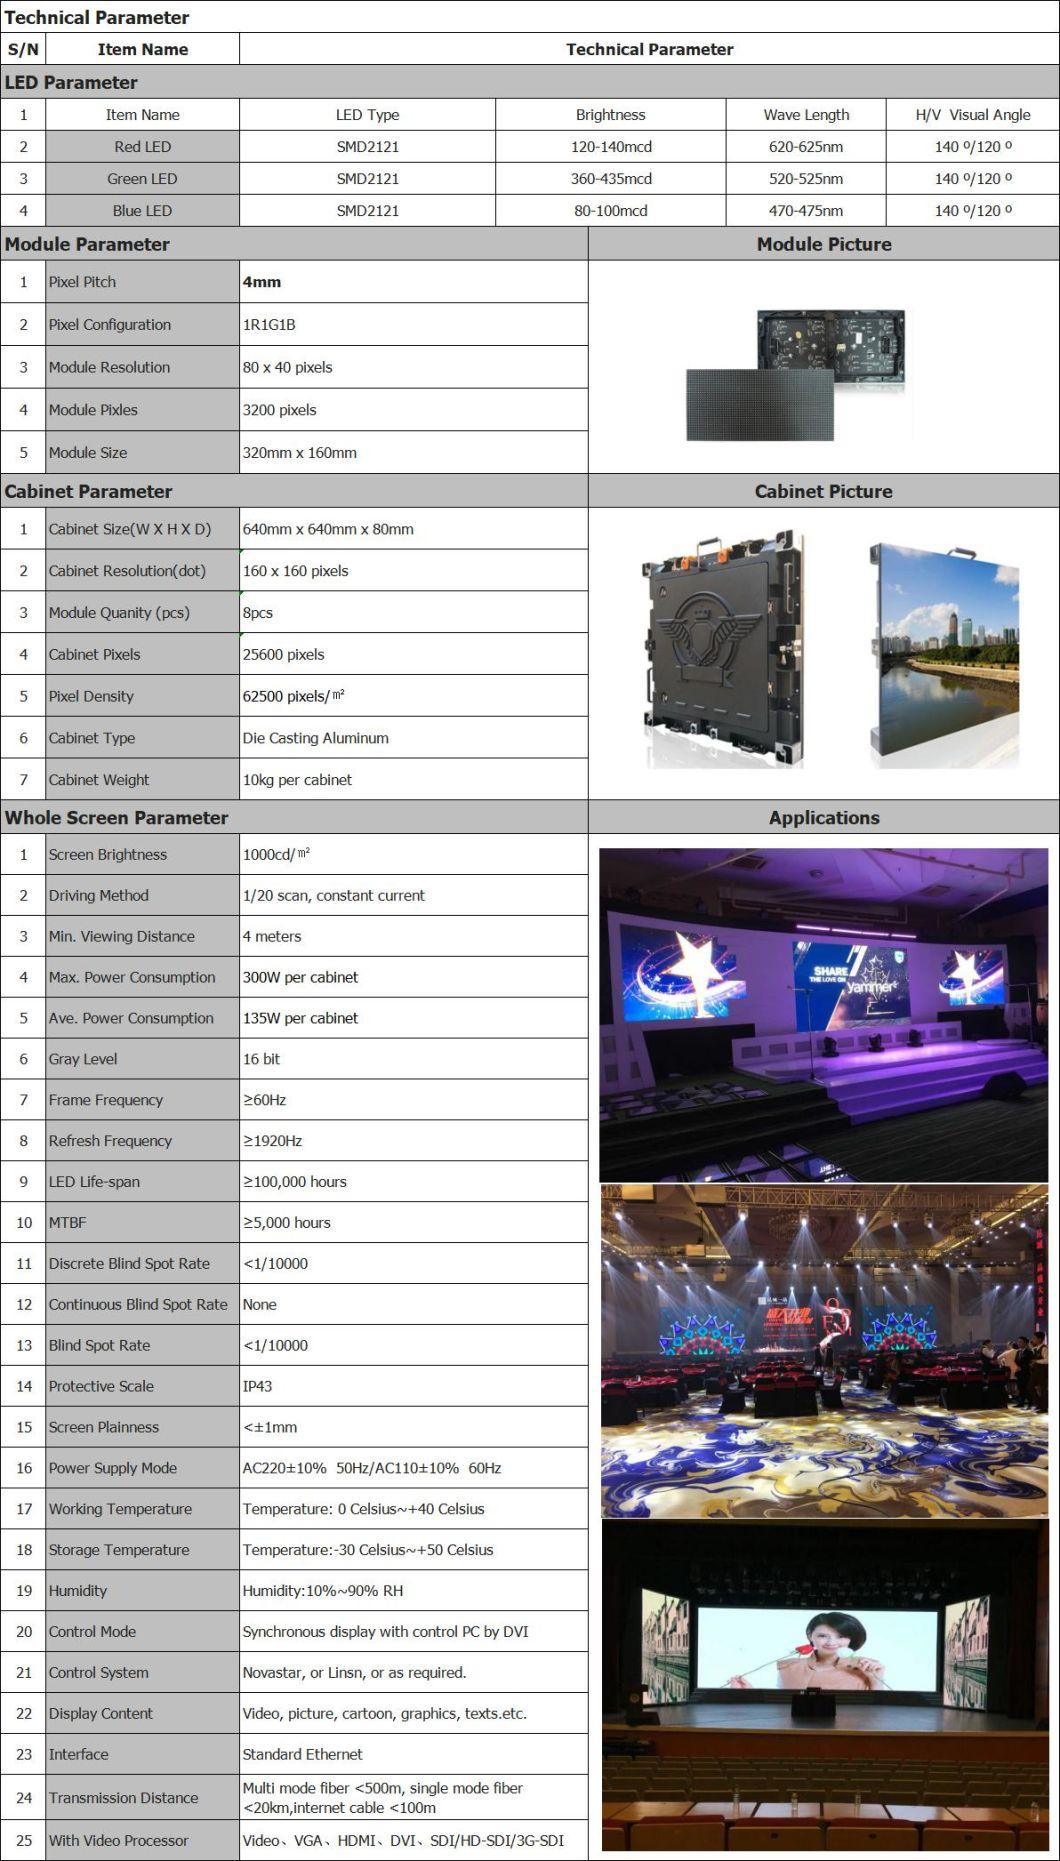 P4mm Video Wall HD SMD Indoor LED Advertising Display Screen for Rental Case